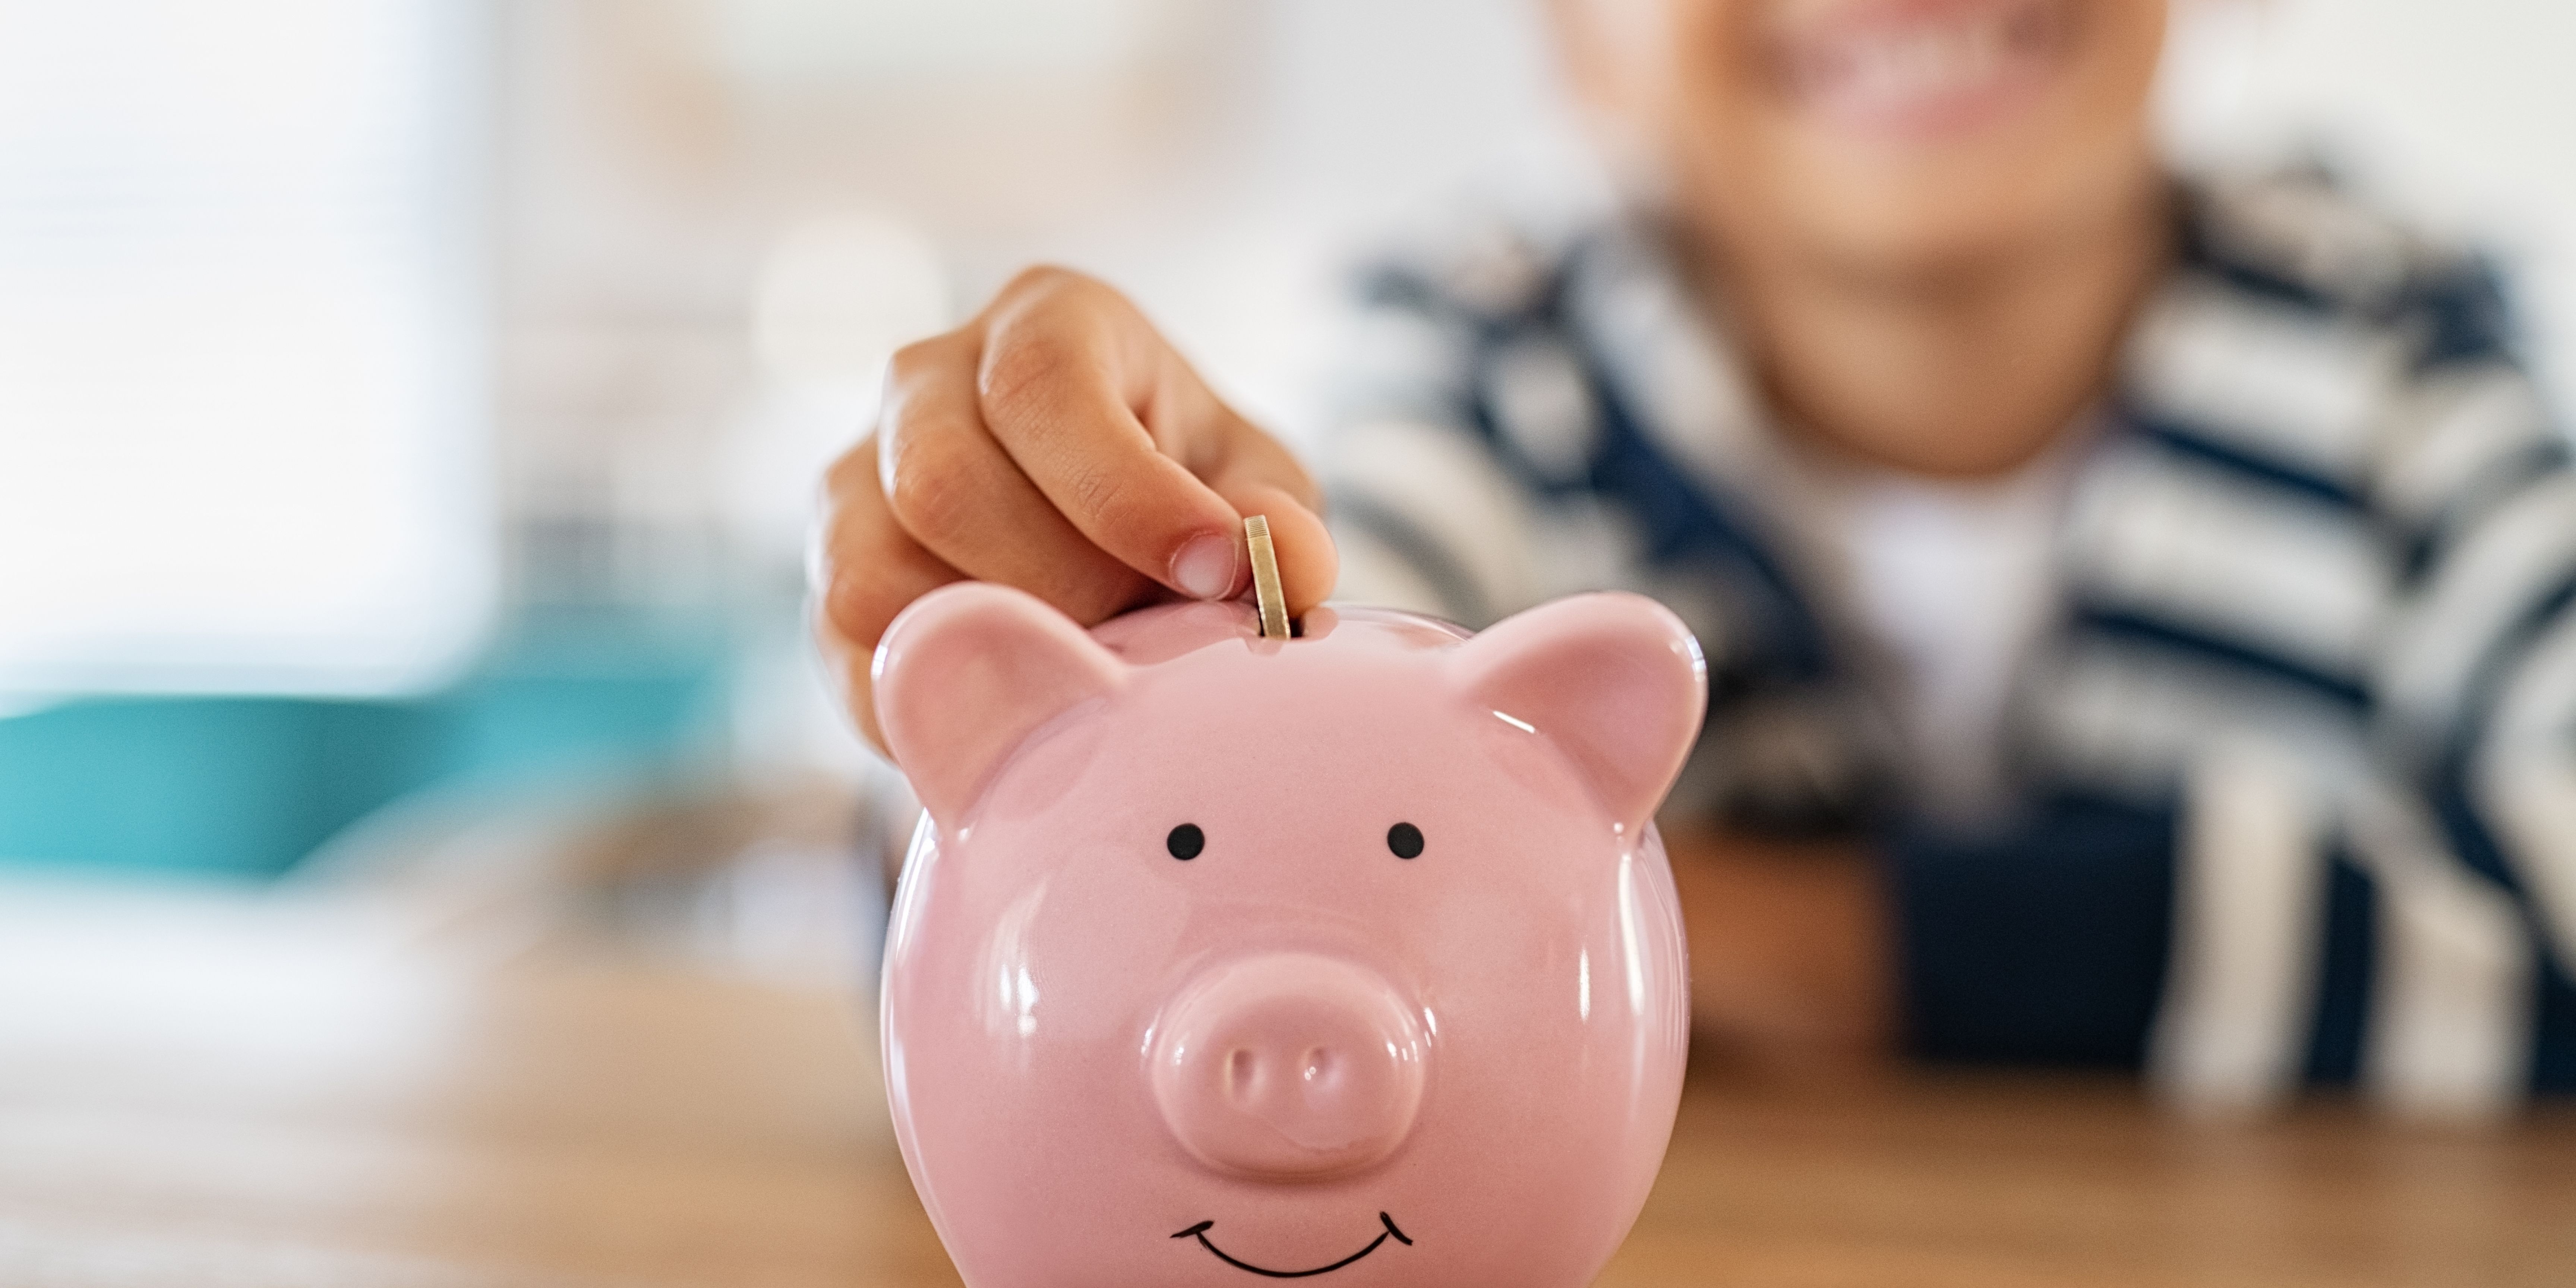 When Should Kids Have Bank Accounts?